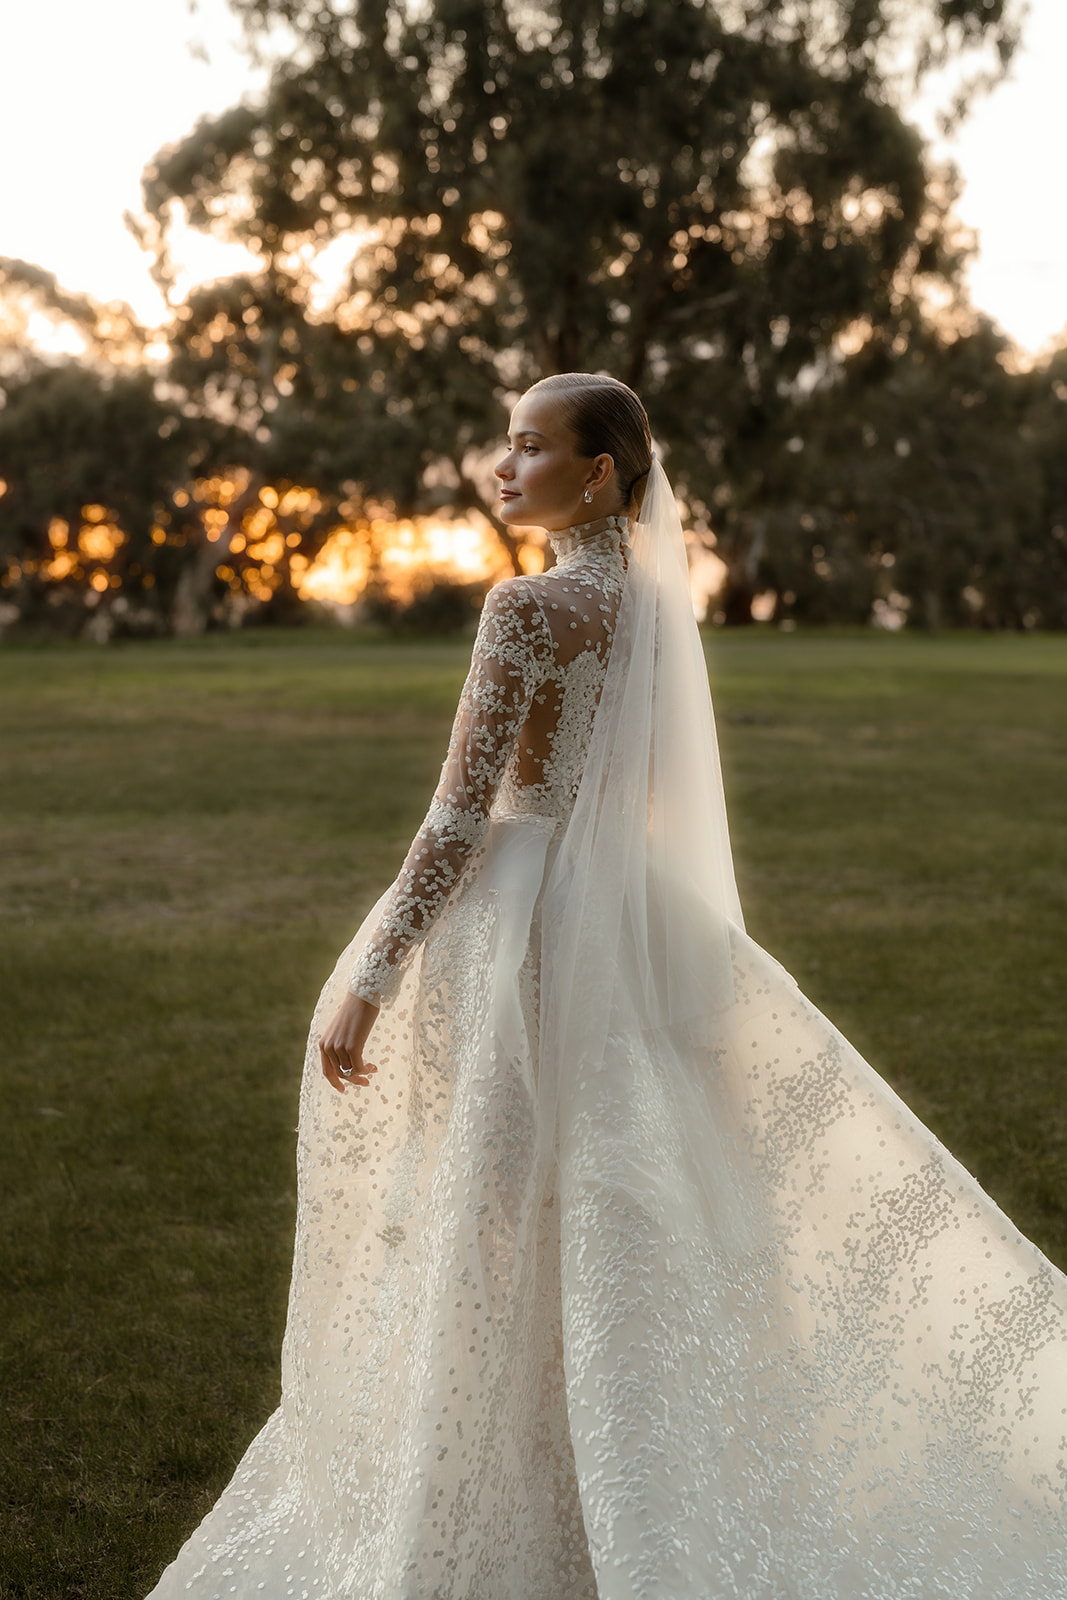 Elegant Melbourne bride in flowing white wedding gown captured in stunning golden hour portraits at Studley Park Grounds